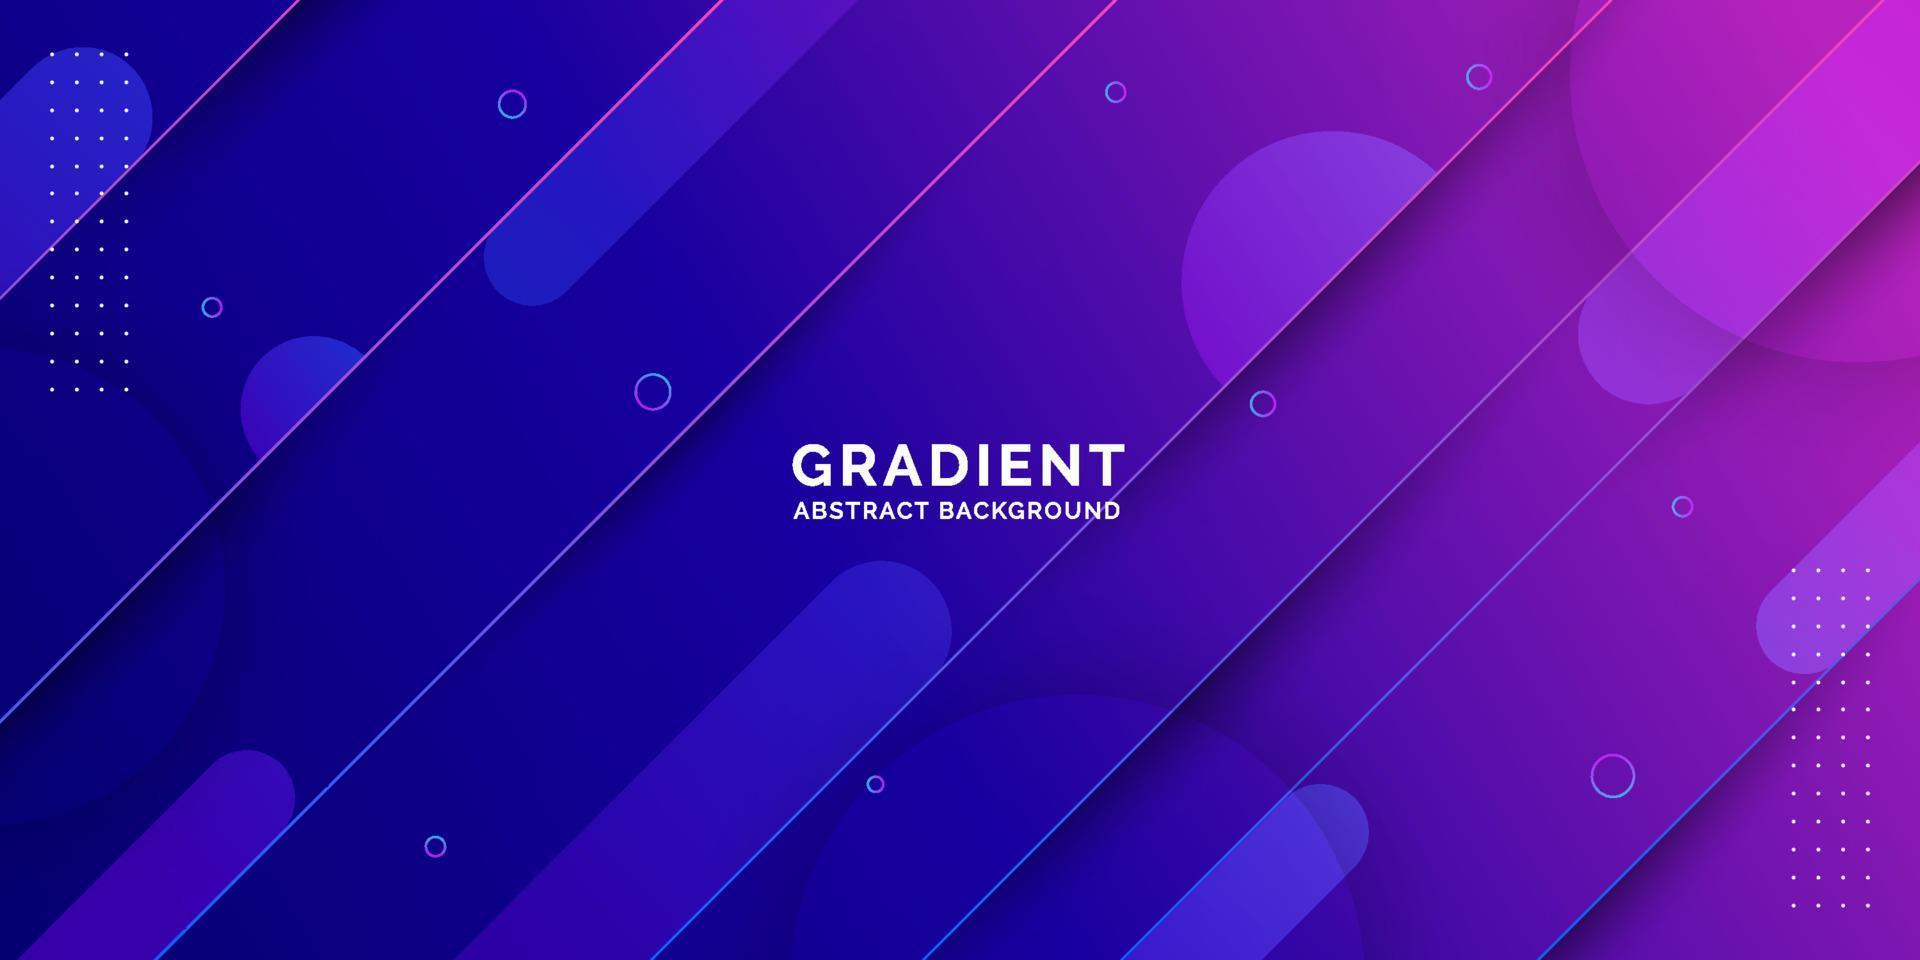 Gradient Abstract Background, Blue and Purple Abstract Backgrounds vector